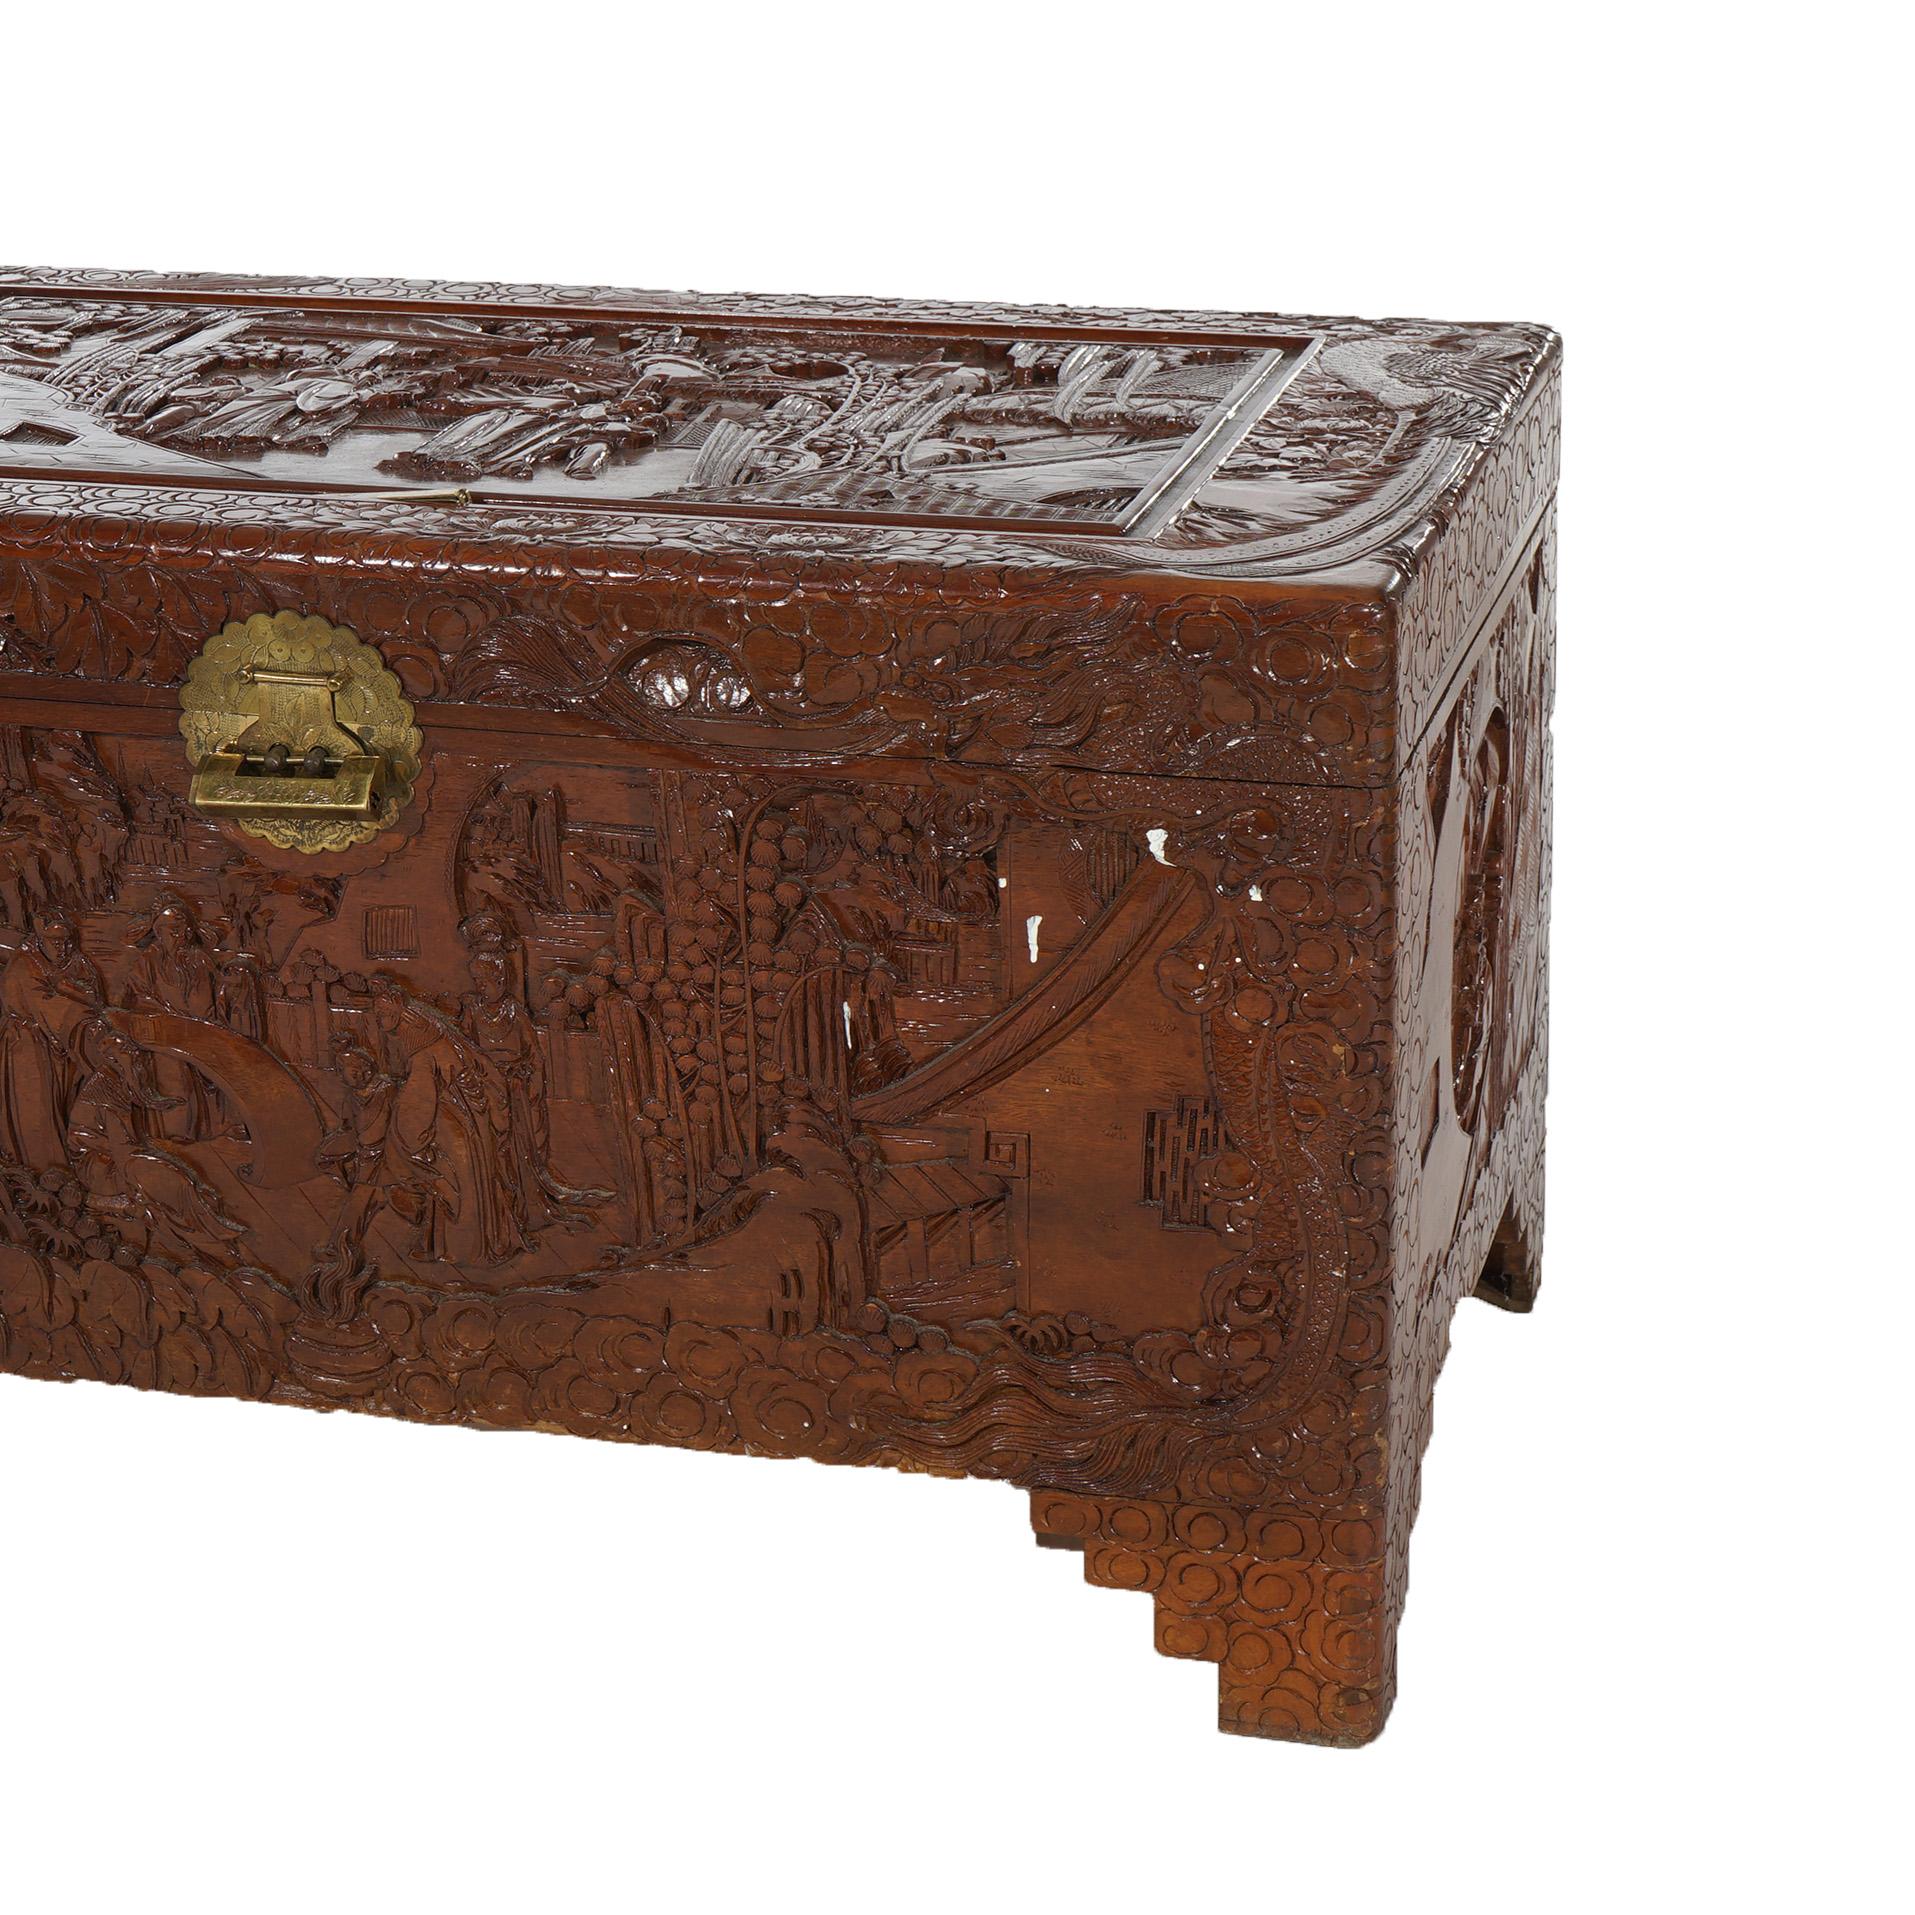 Chinese Carved Hardwood Figural Blanket Chest with Village Scene in Relief 20thC For Sale 6